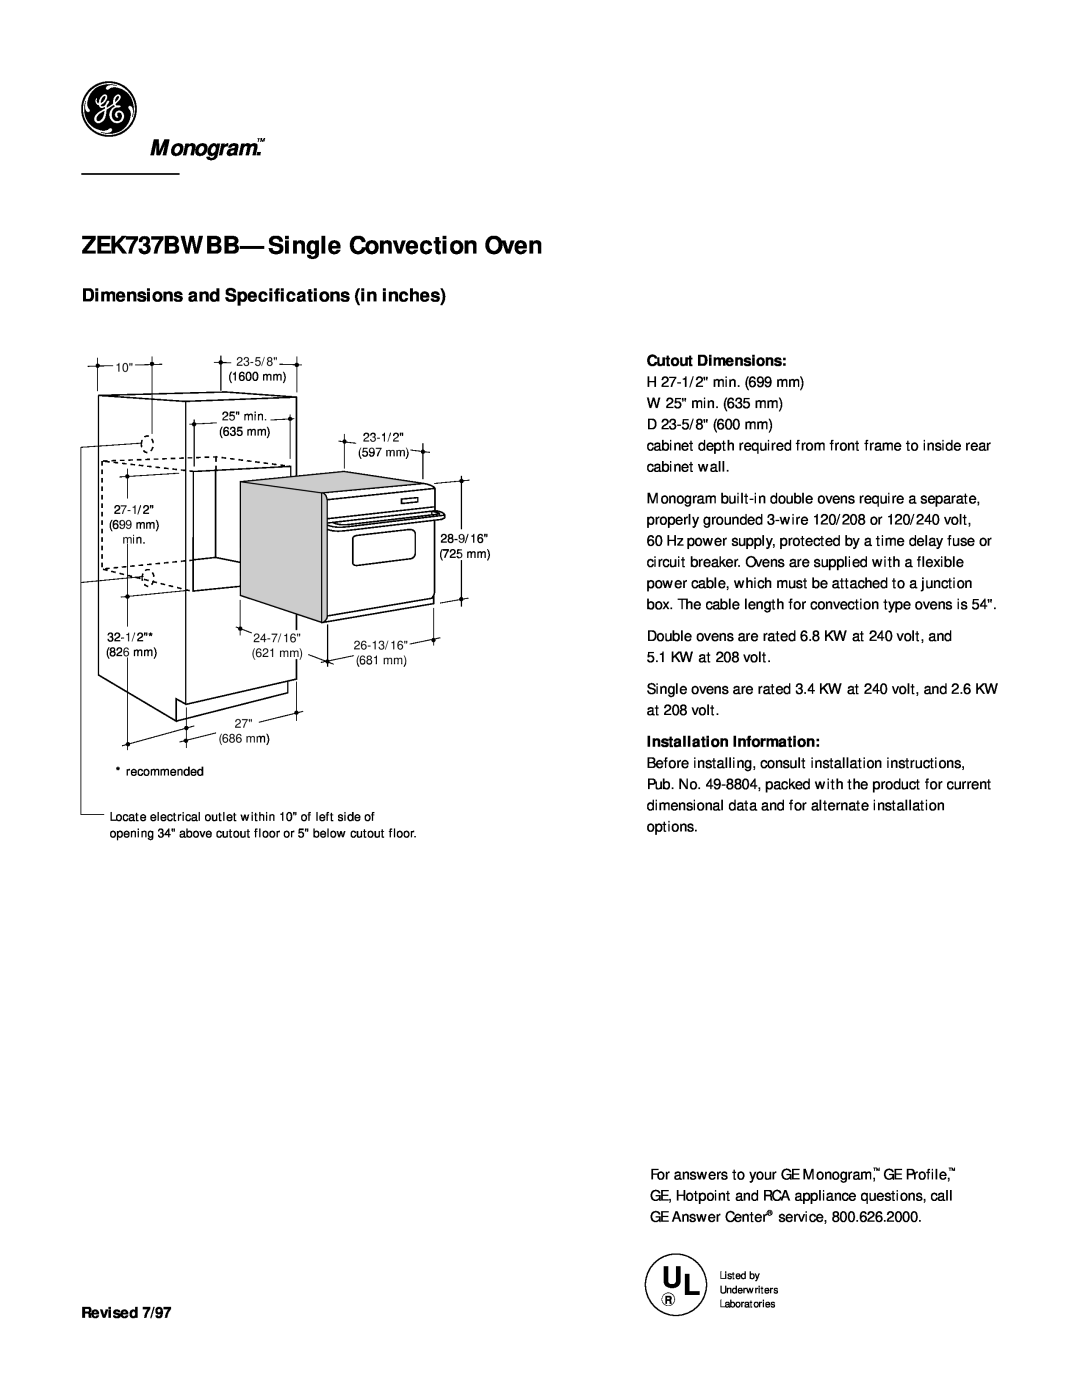 GE dimensions ZEK737BWBB-SingleConvection Oven, Monogram, Dimensions and Specifications in inches, Cutout Dimensions 